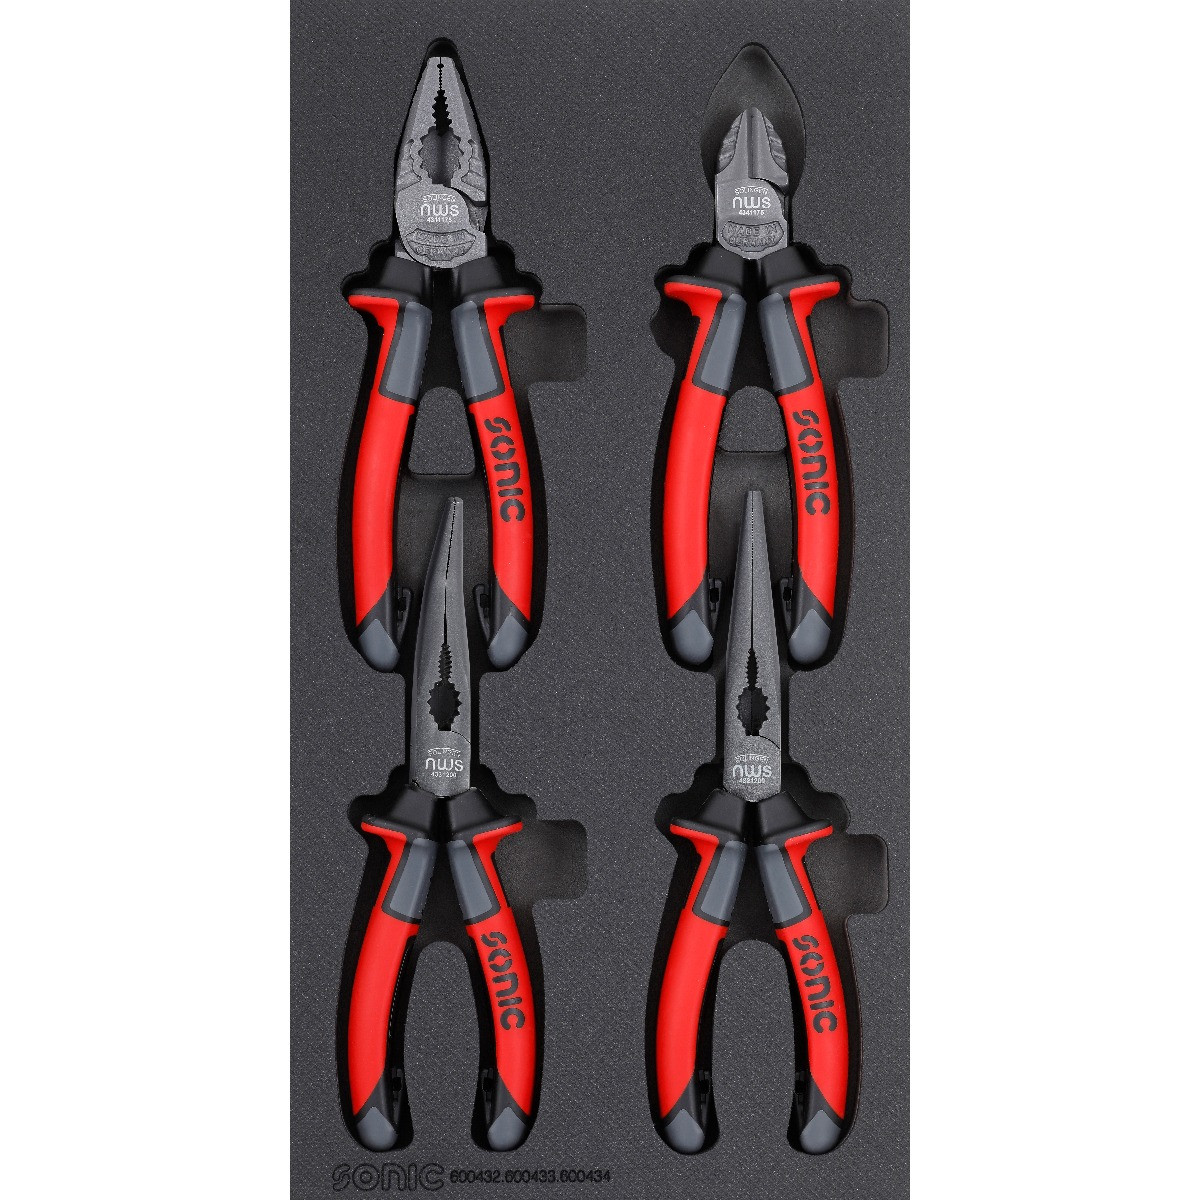 Oil Filter Pliers - Sonic Tools